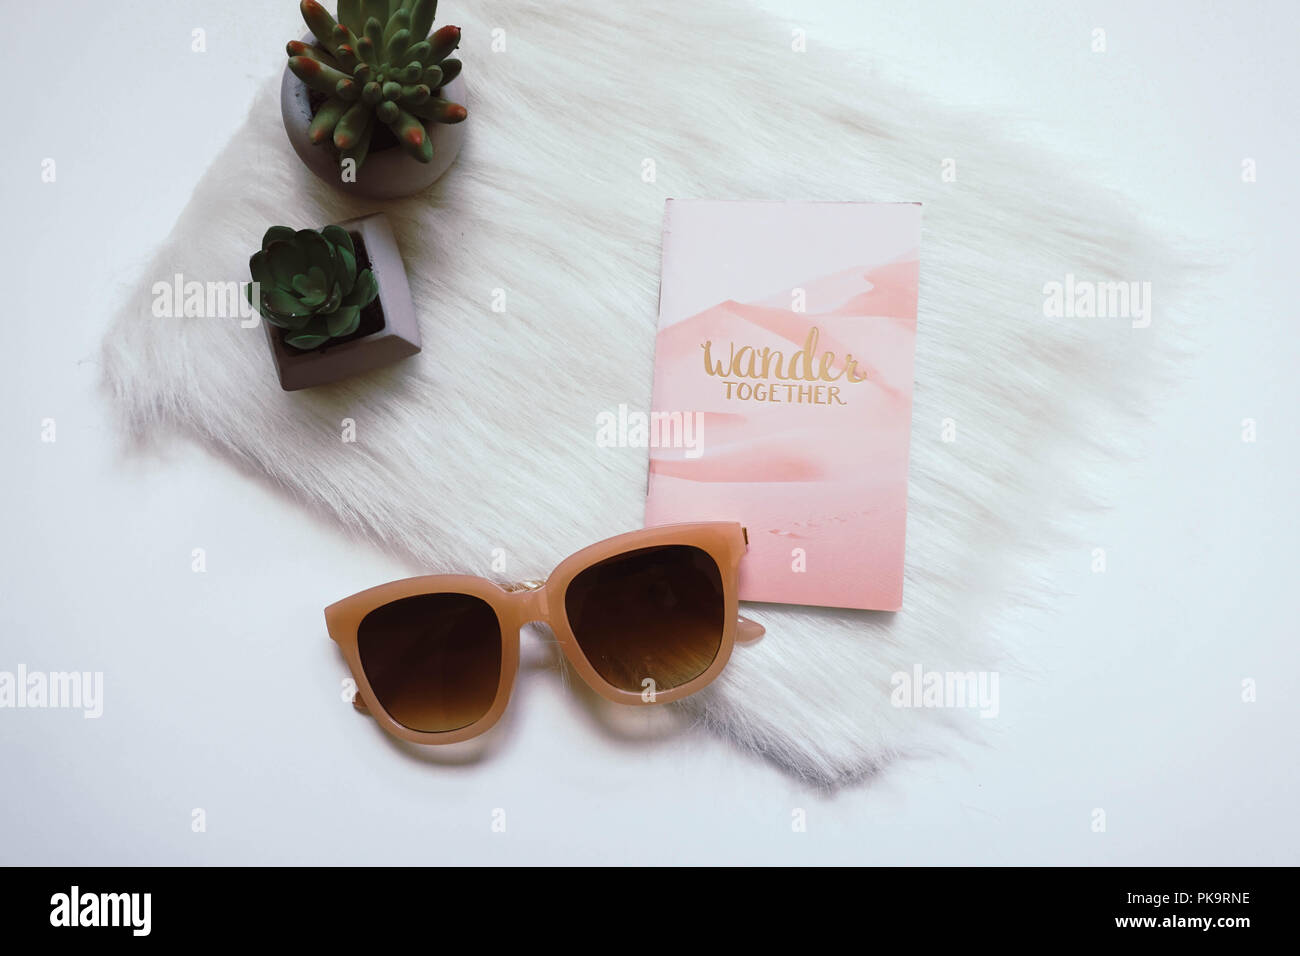 Bright, white flat lay photograph featuring succulents, fur rug, sunglasses, and a wander together notebook. Stock Photo